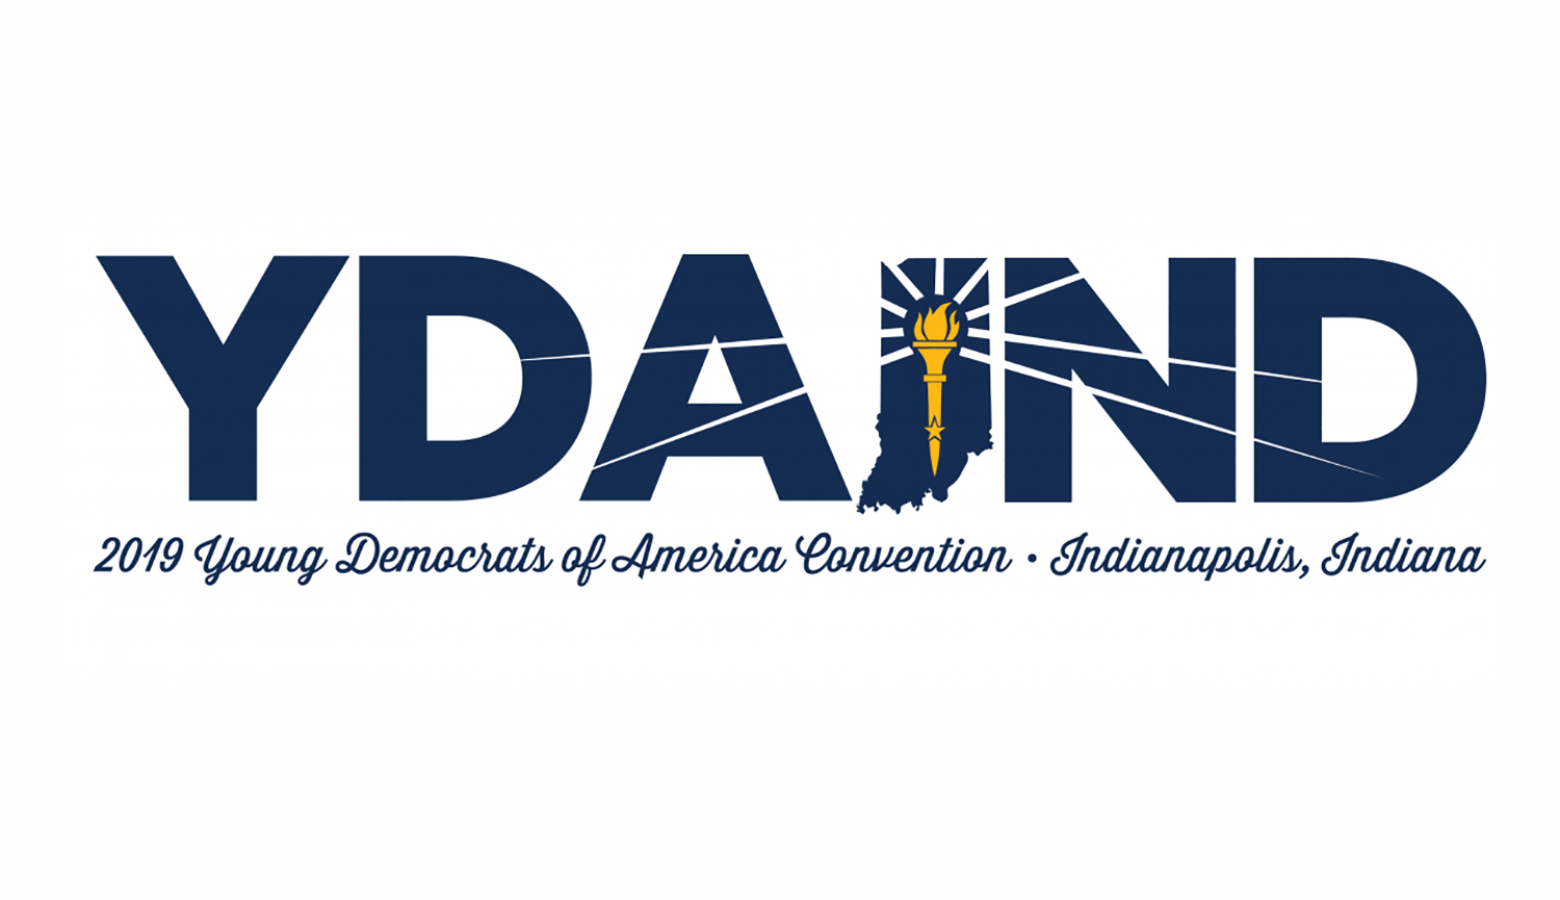 The Young Democrats Of America National Convention in Indianapolis is expected to draw more than 1,000 attendees. (Courtesy of YDA.org)